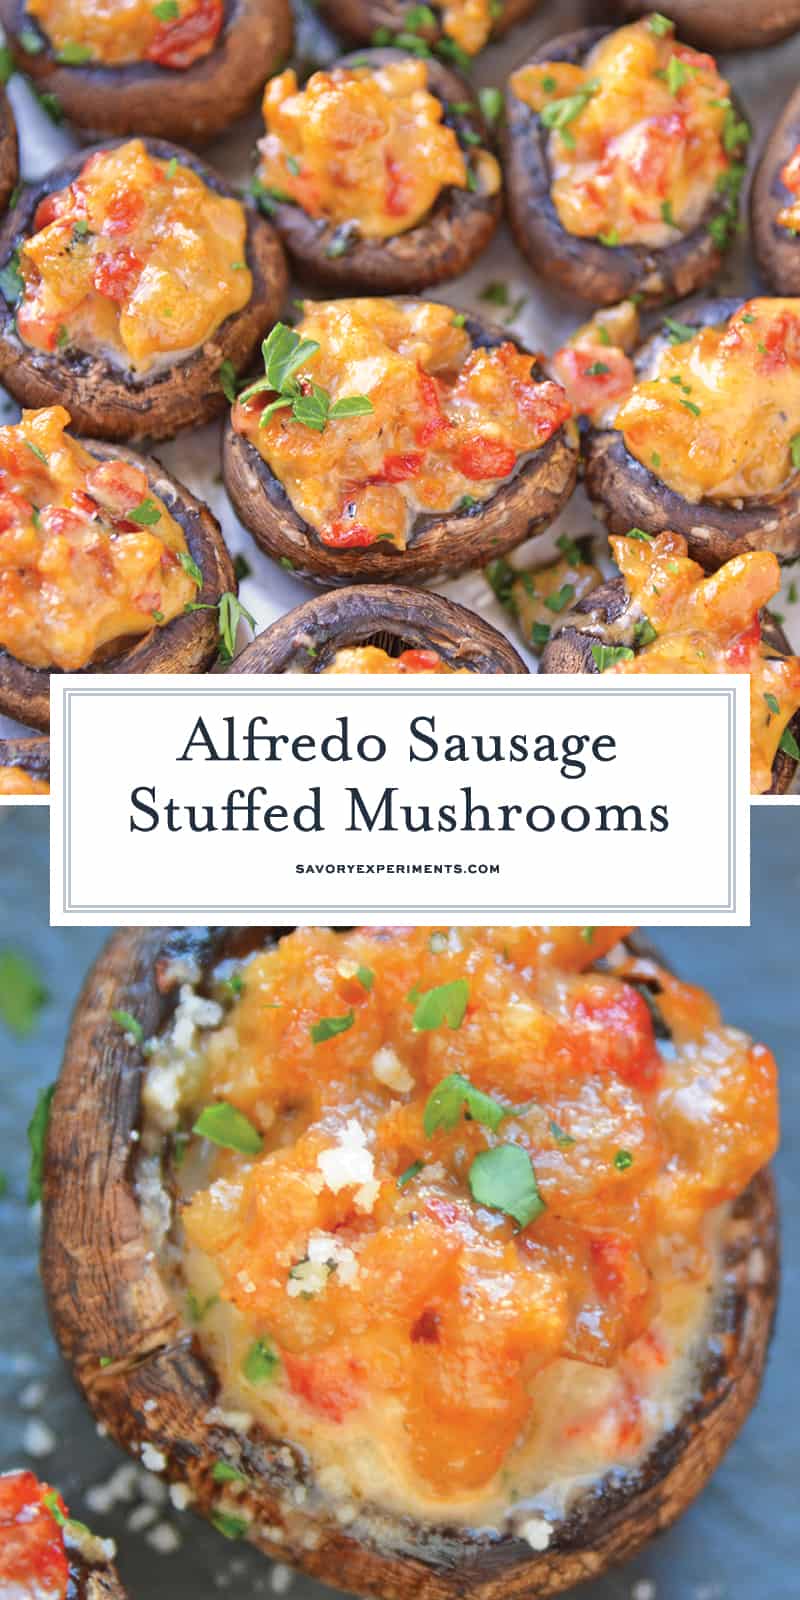 Alfredo Sausage Stuffed Mushrooms are an easy appetizer that's perfect for holiday parties. Everyone will love these stuffed mushrooms with sausage! #sausagestuffedmushrooms #stuffedmushrooms www.savoryexperiments.com